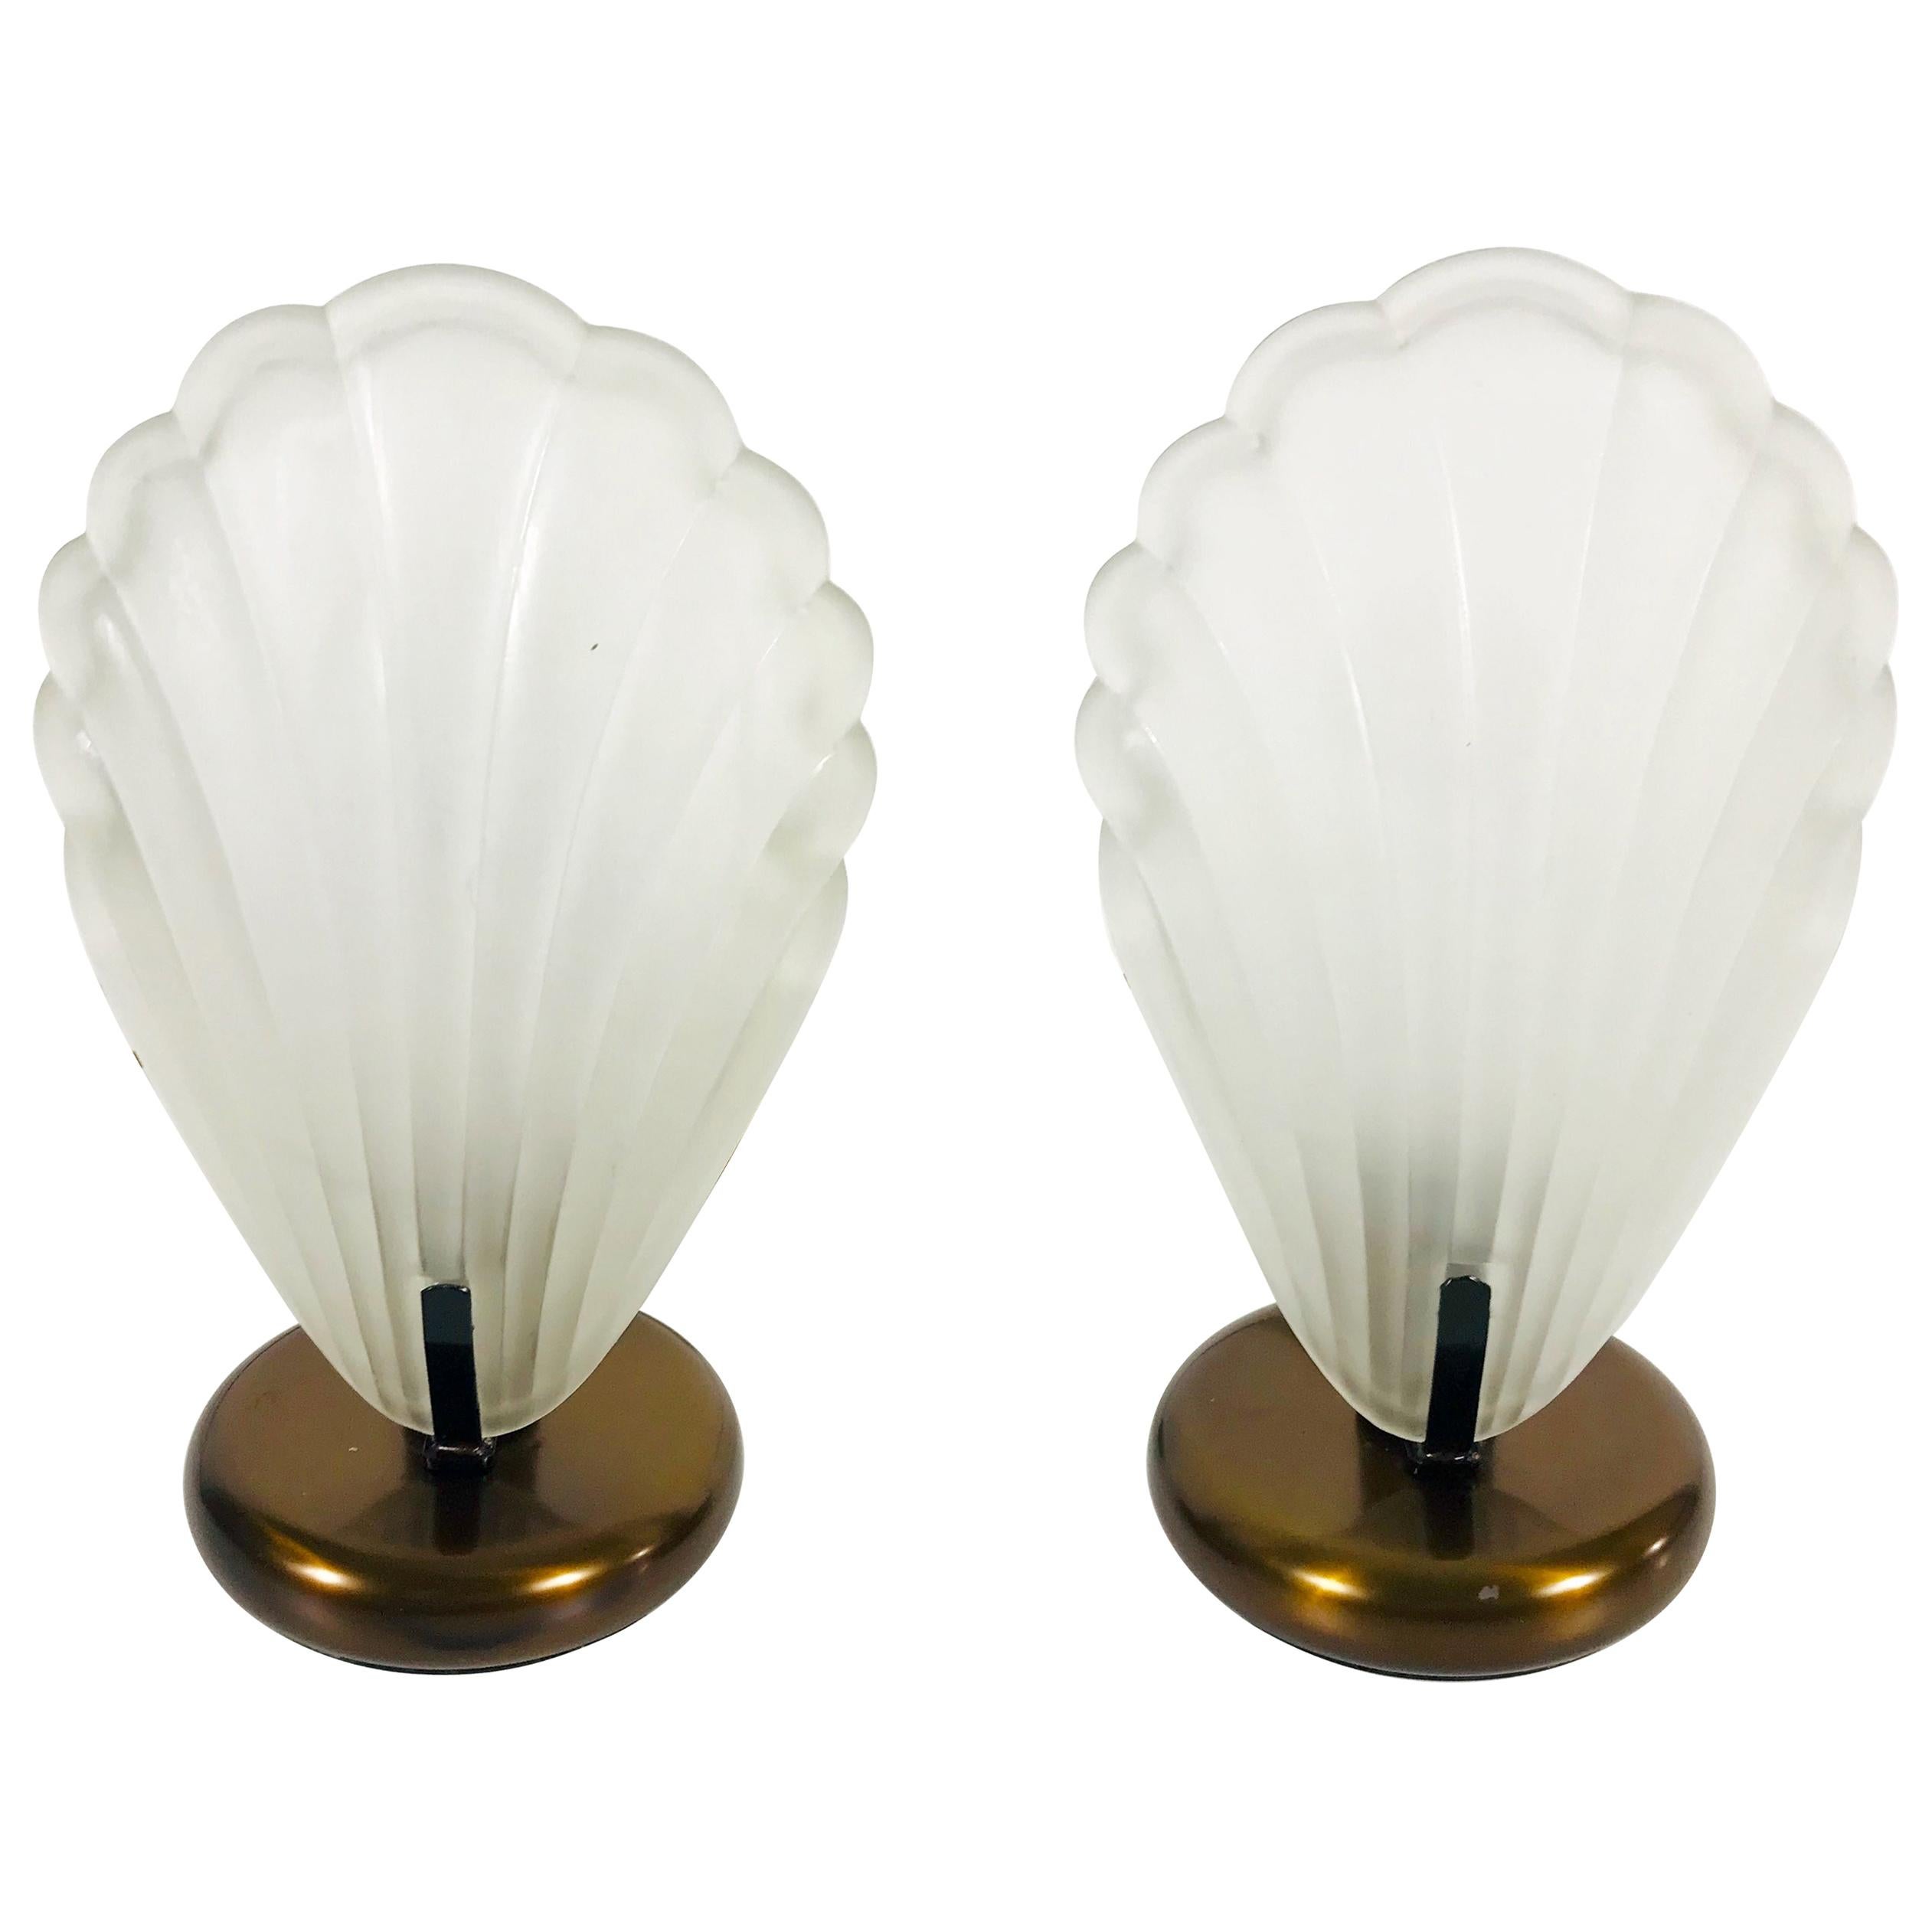 Pair of Shell Shaped Table Lamps by AF Cinquanta, 1980s